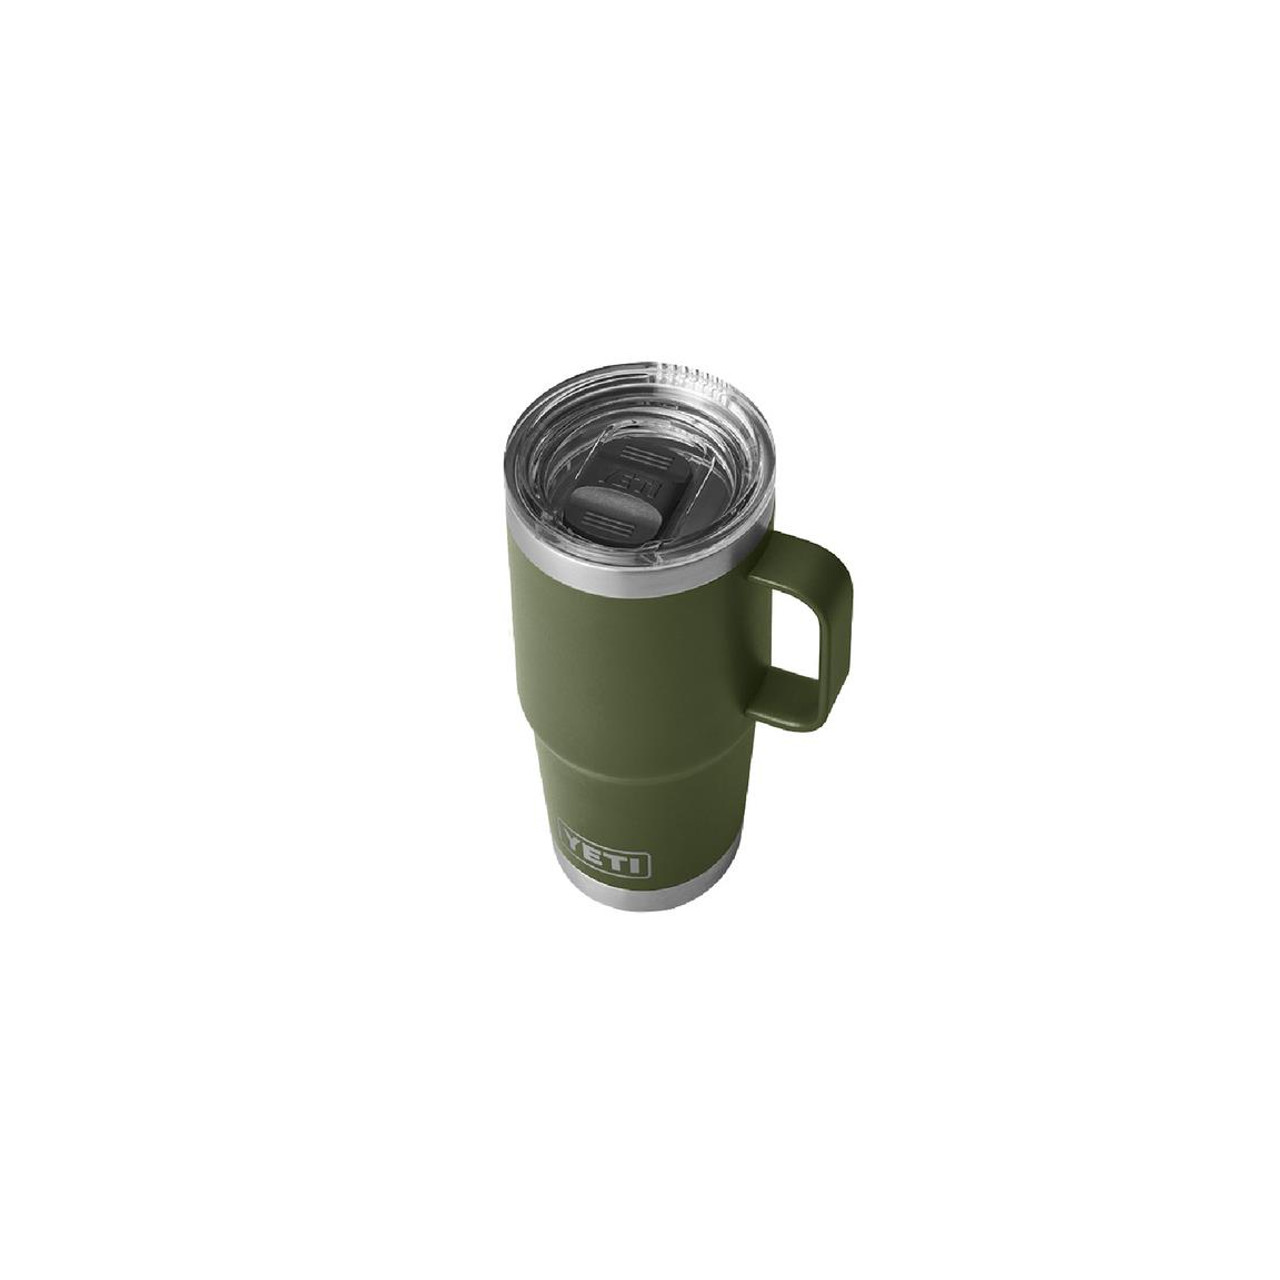 https://cdn11.bigcommerce.com/s-stfpjhht/images/stencil/1280x1280/products/24190/44266/Yeti-Rambler-20-Oz-Travel-Mug-With-Stronghold-Lid-Highlands-Olive-21071500705-888830130490_image1__54407.1641849242.jpg?c=2